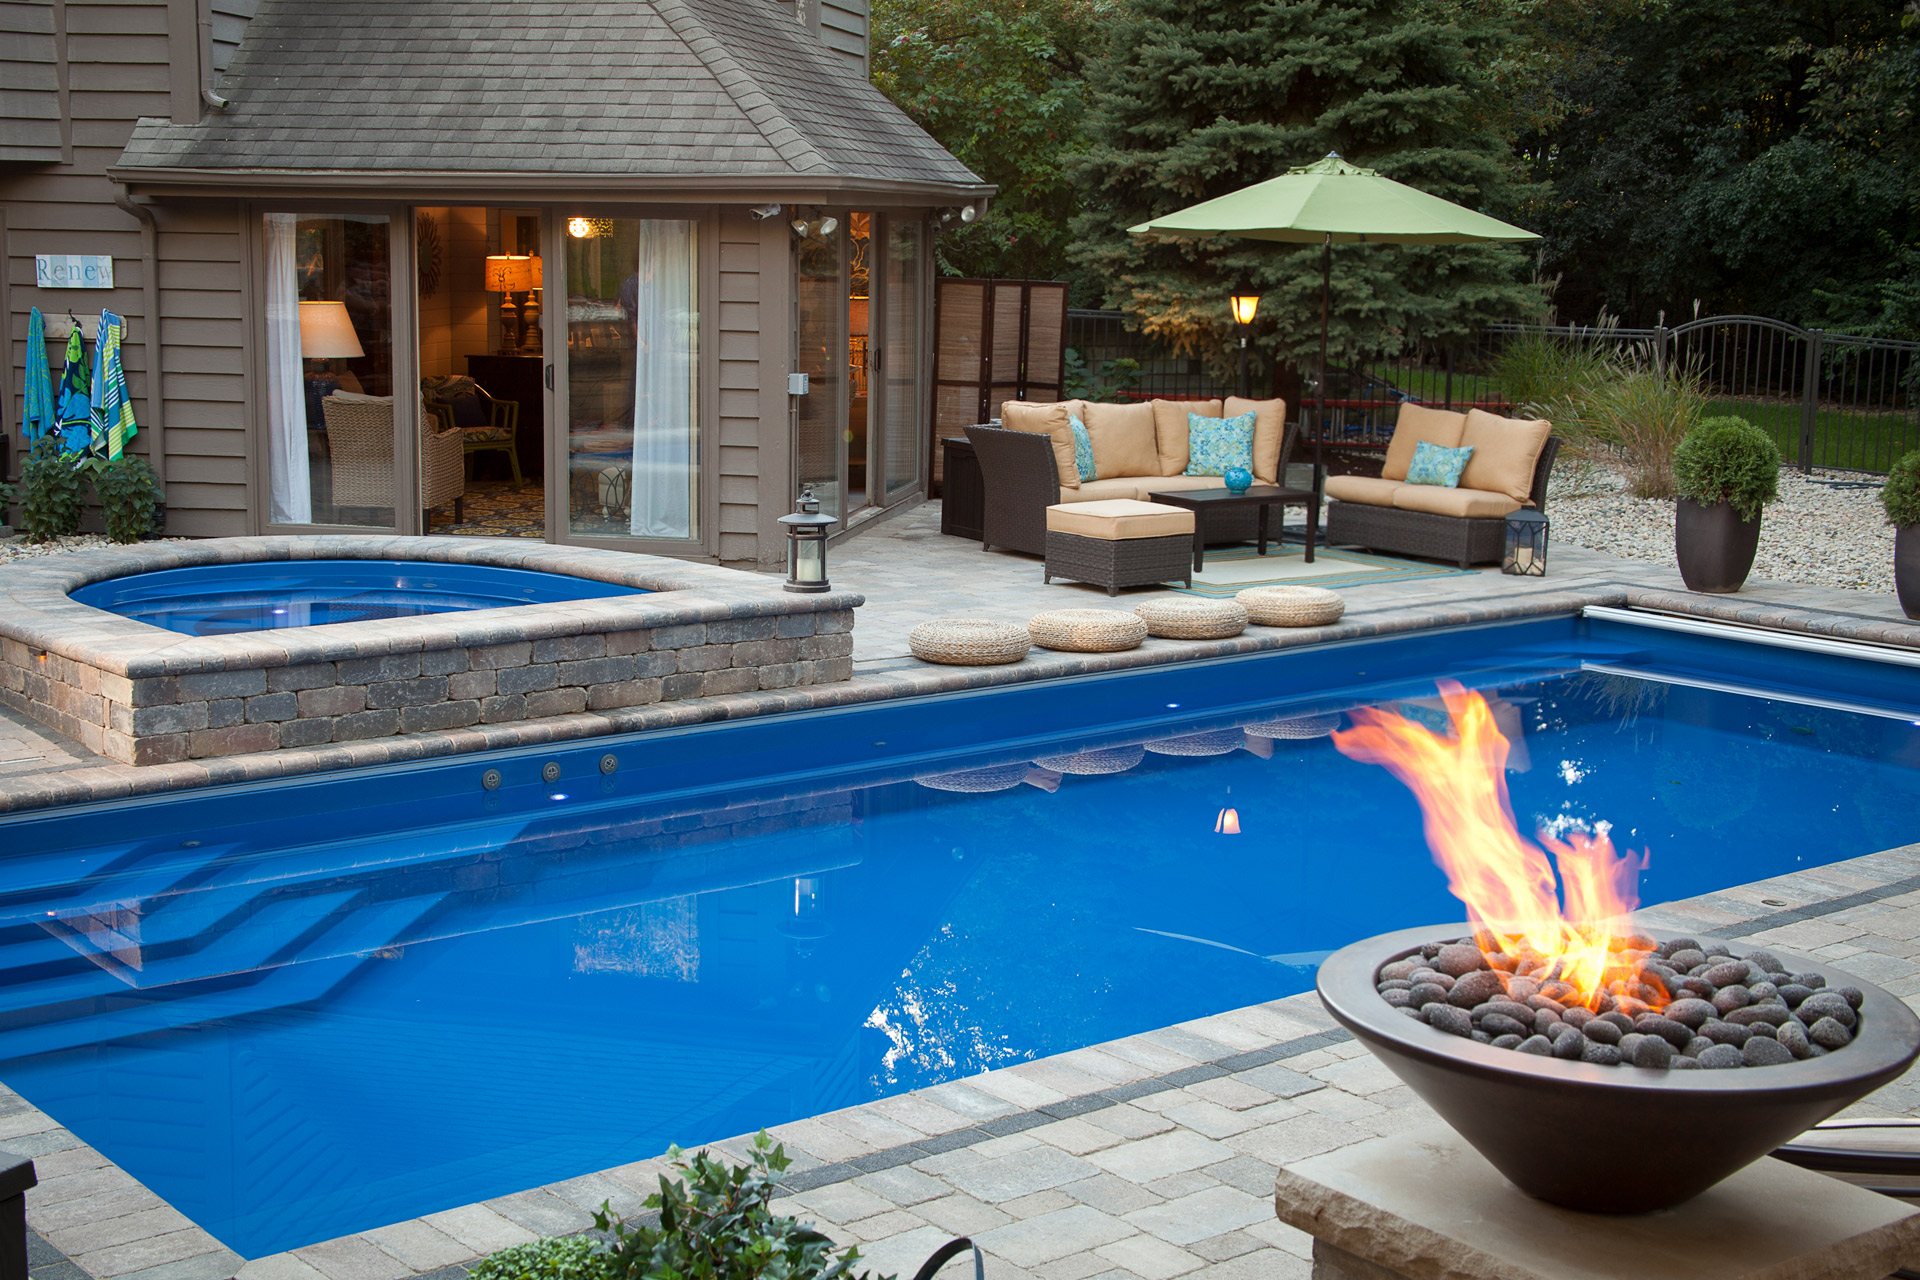 swimming pool contractor near me rockton il | Sonco Pools and Spas provides only the finest ...